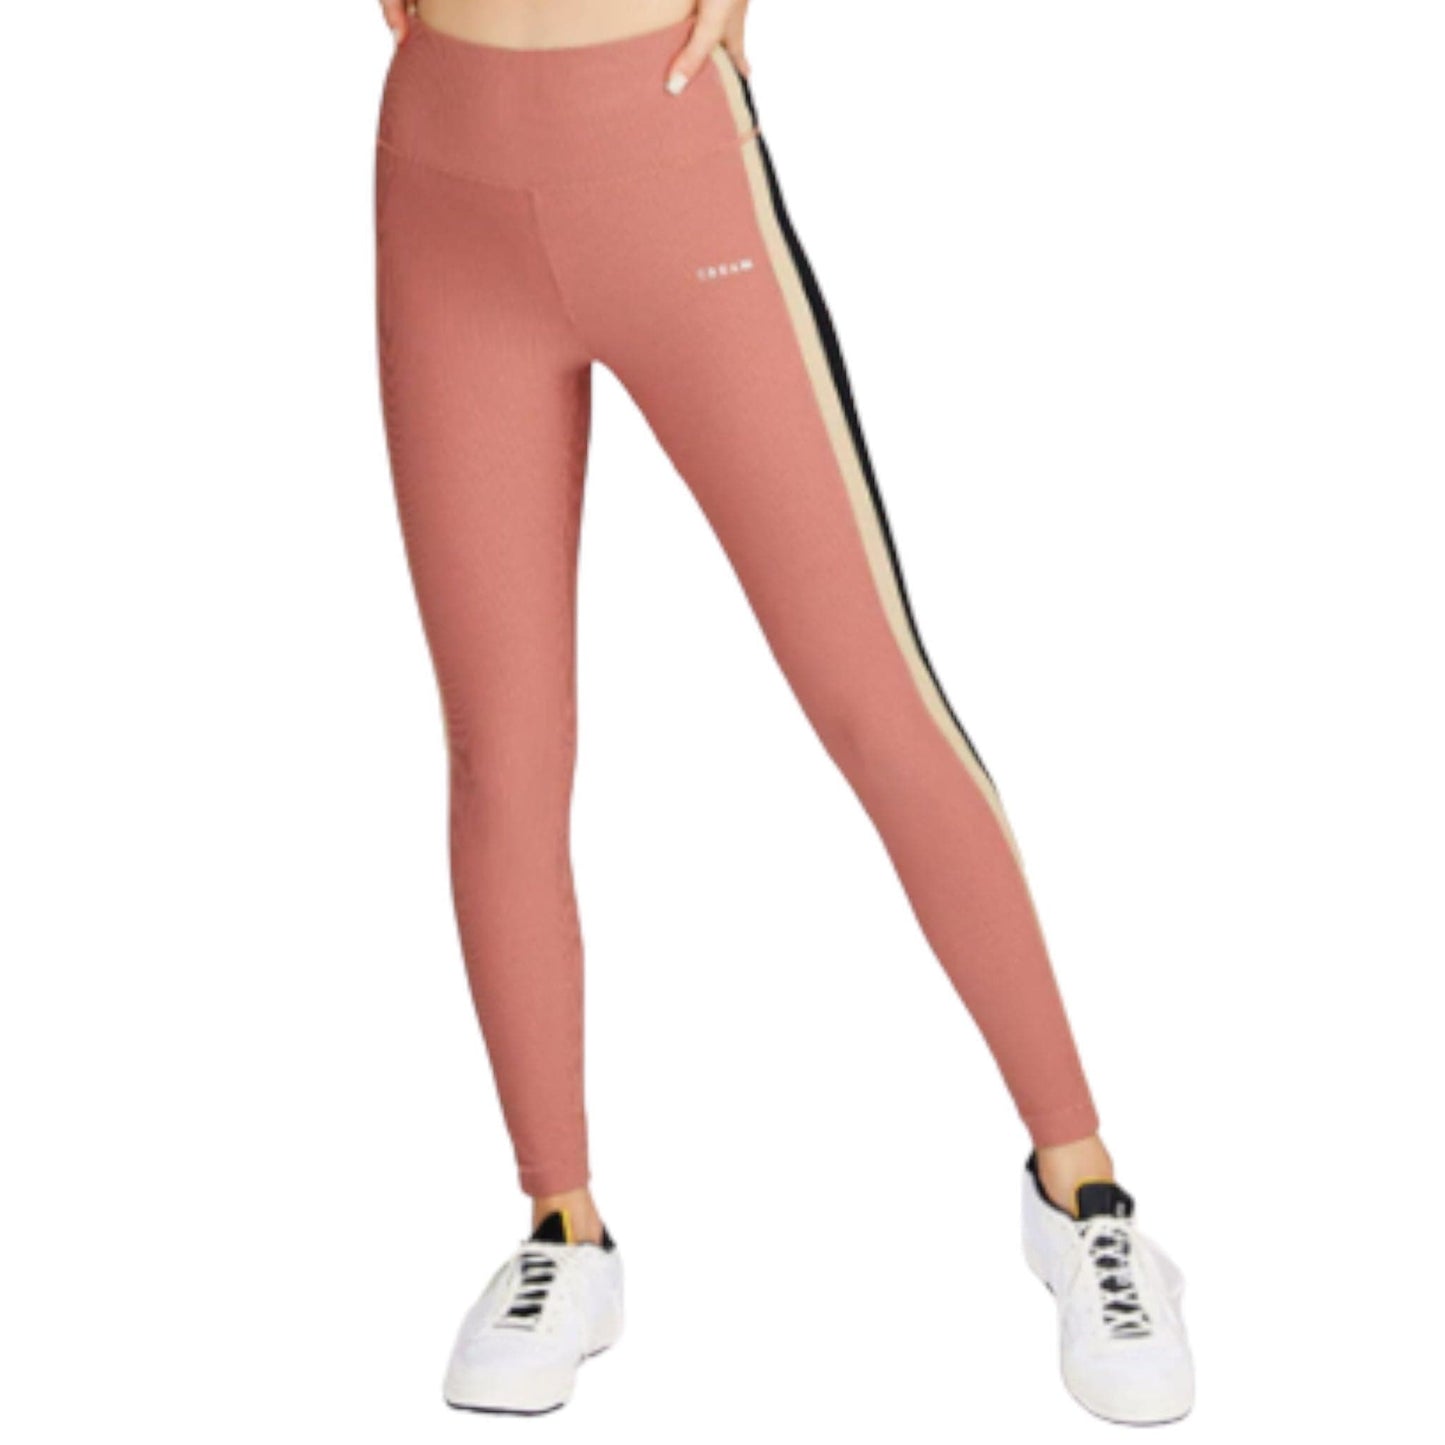 Ribbed 7/8 Legging with Two Tone Contrasting Side Stripe Design